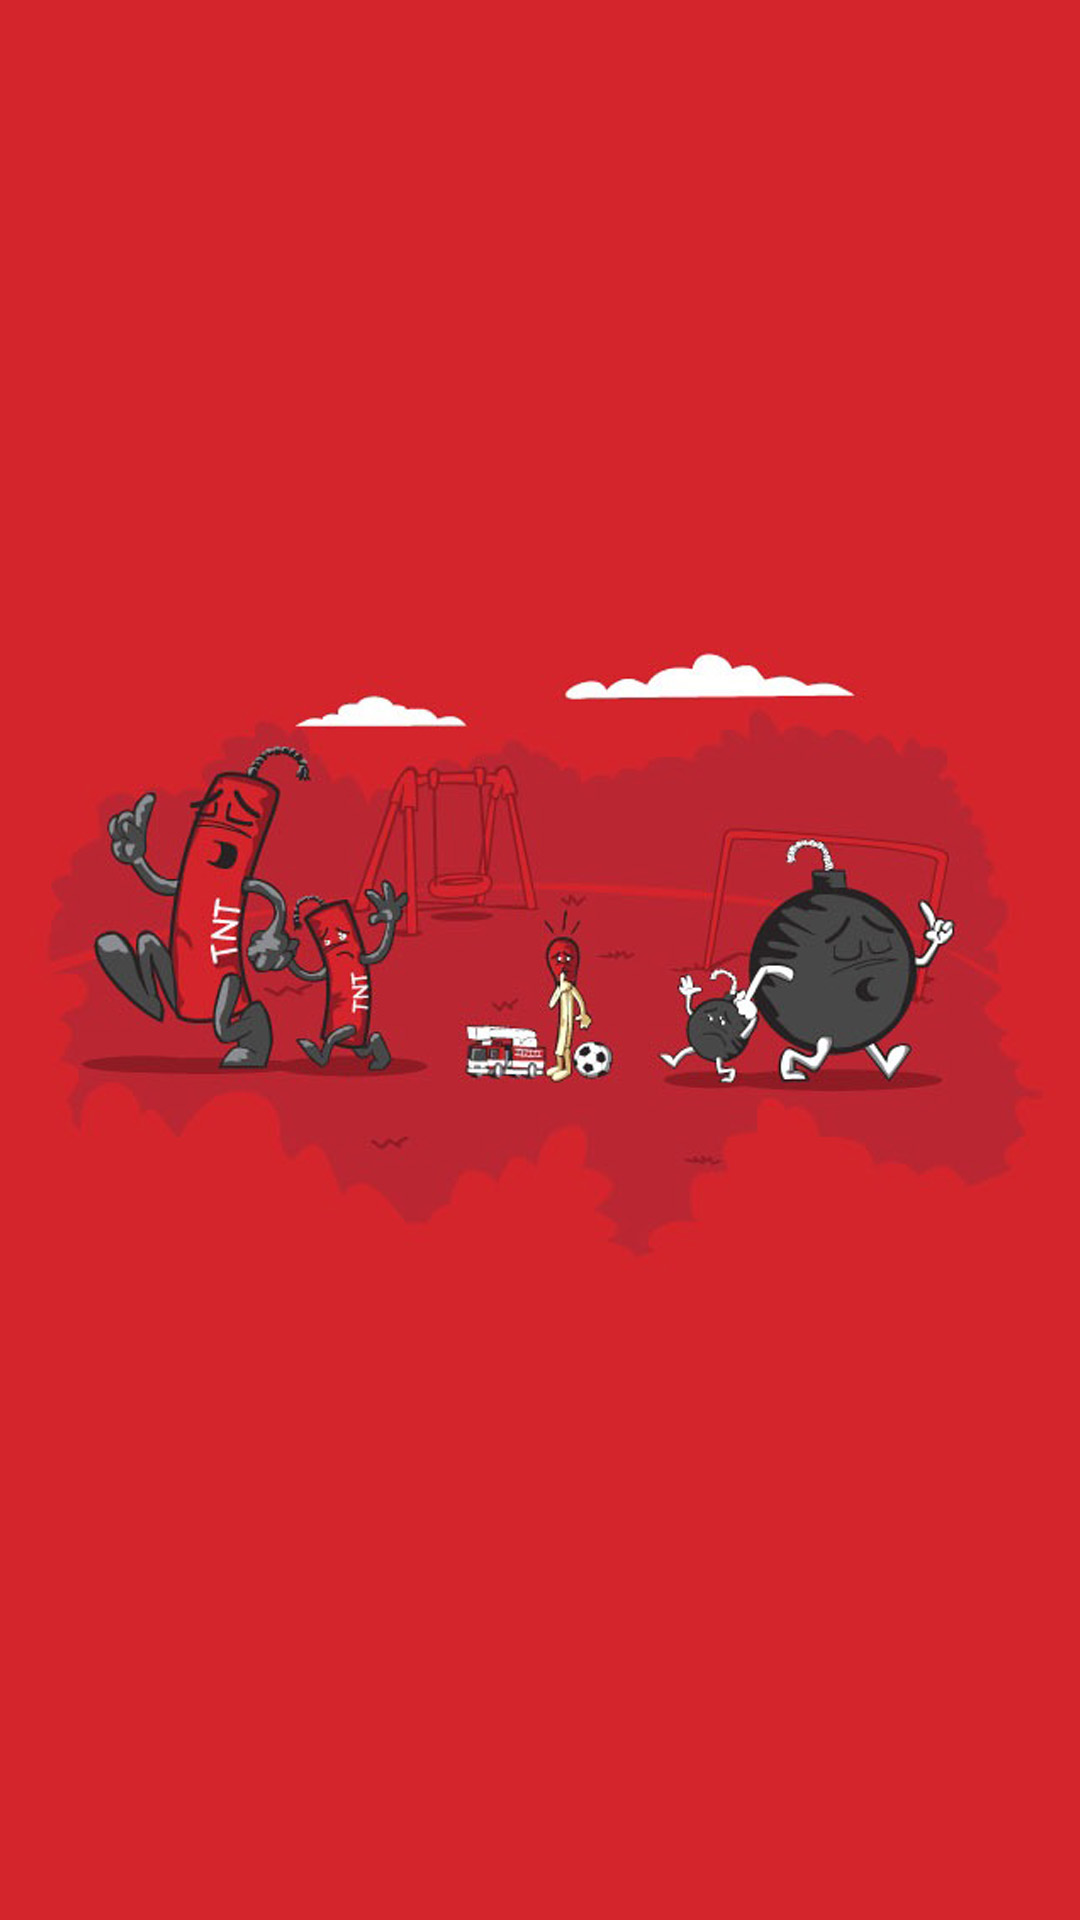 funny wallpaper for android,red,text,illustration,cartoon,t shirt